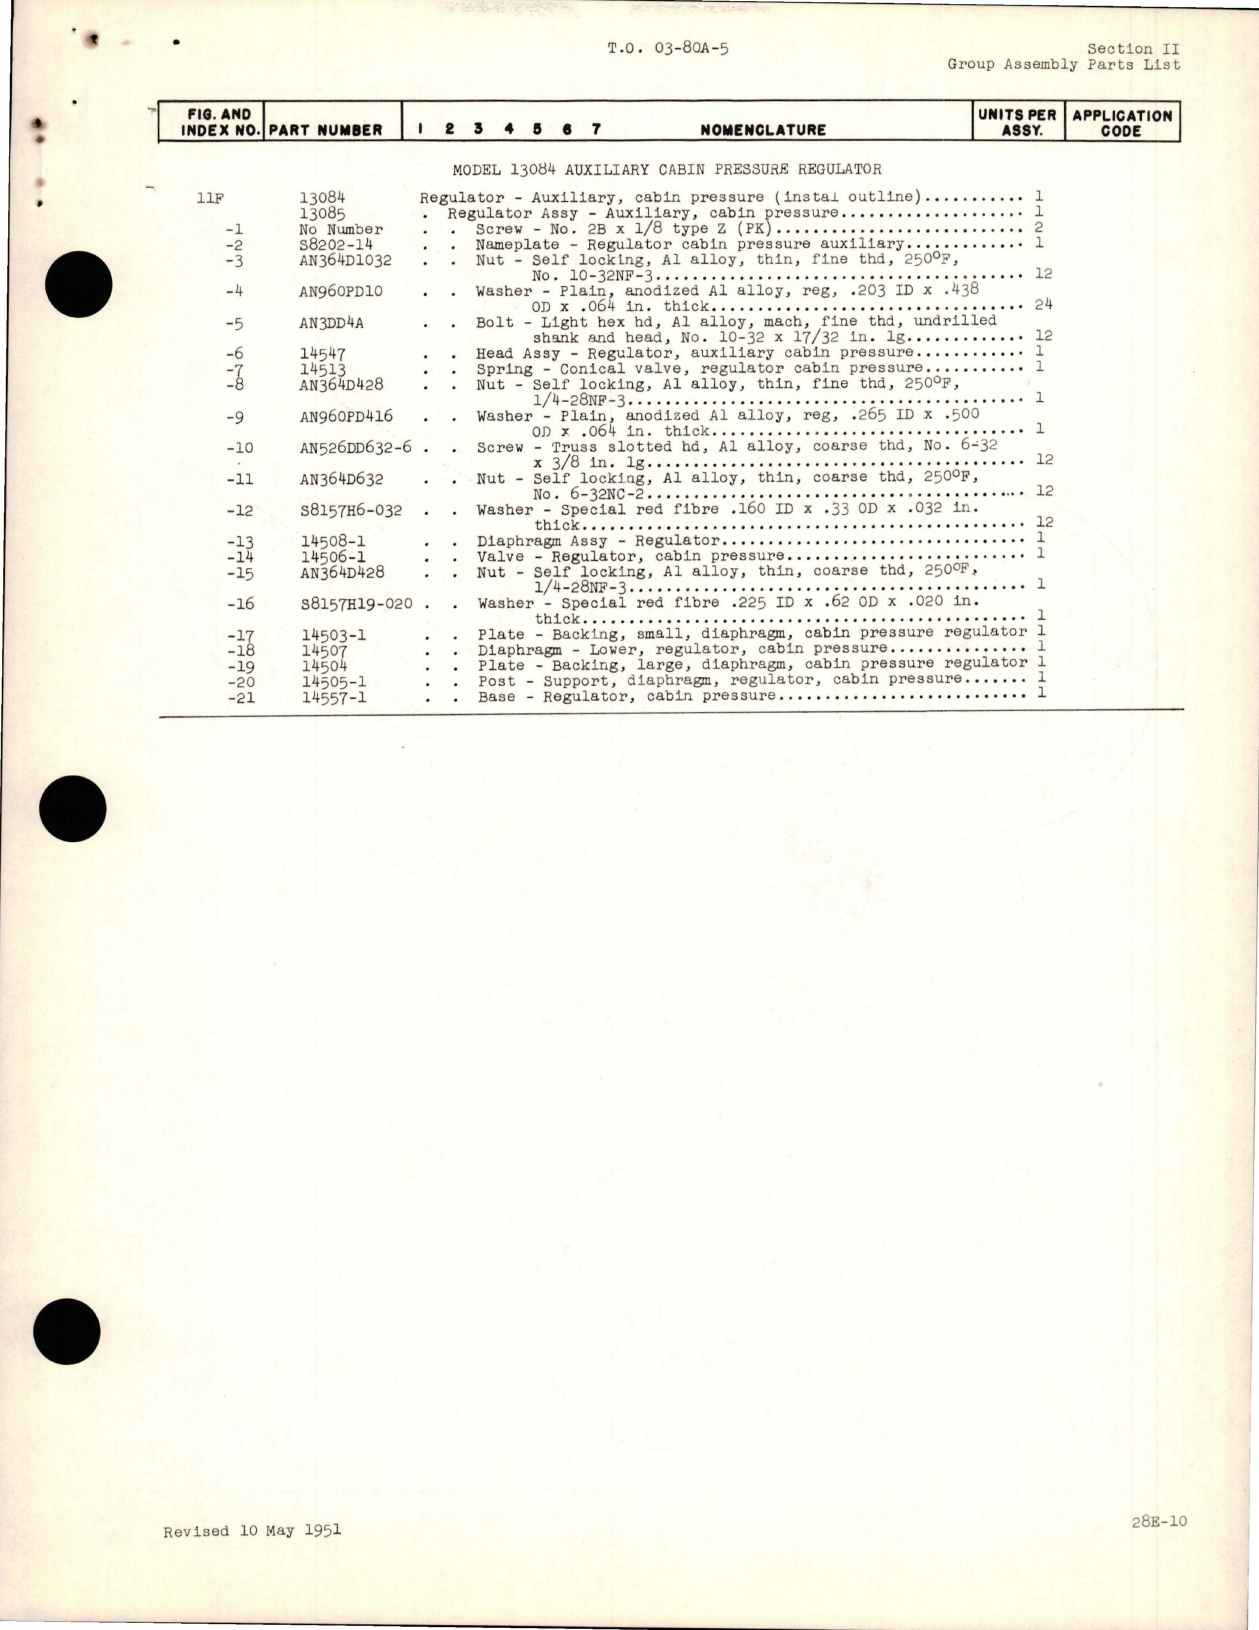 Sample page 5 from AirCorps Library document: Parts Catalog for Cabin Pressure Regulators 